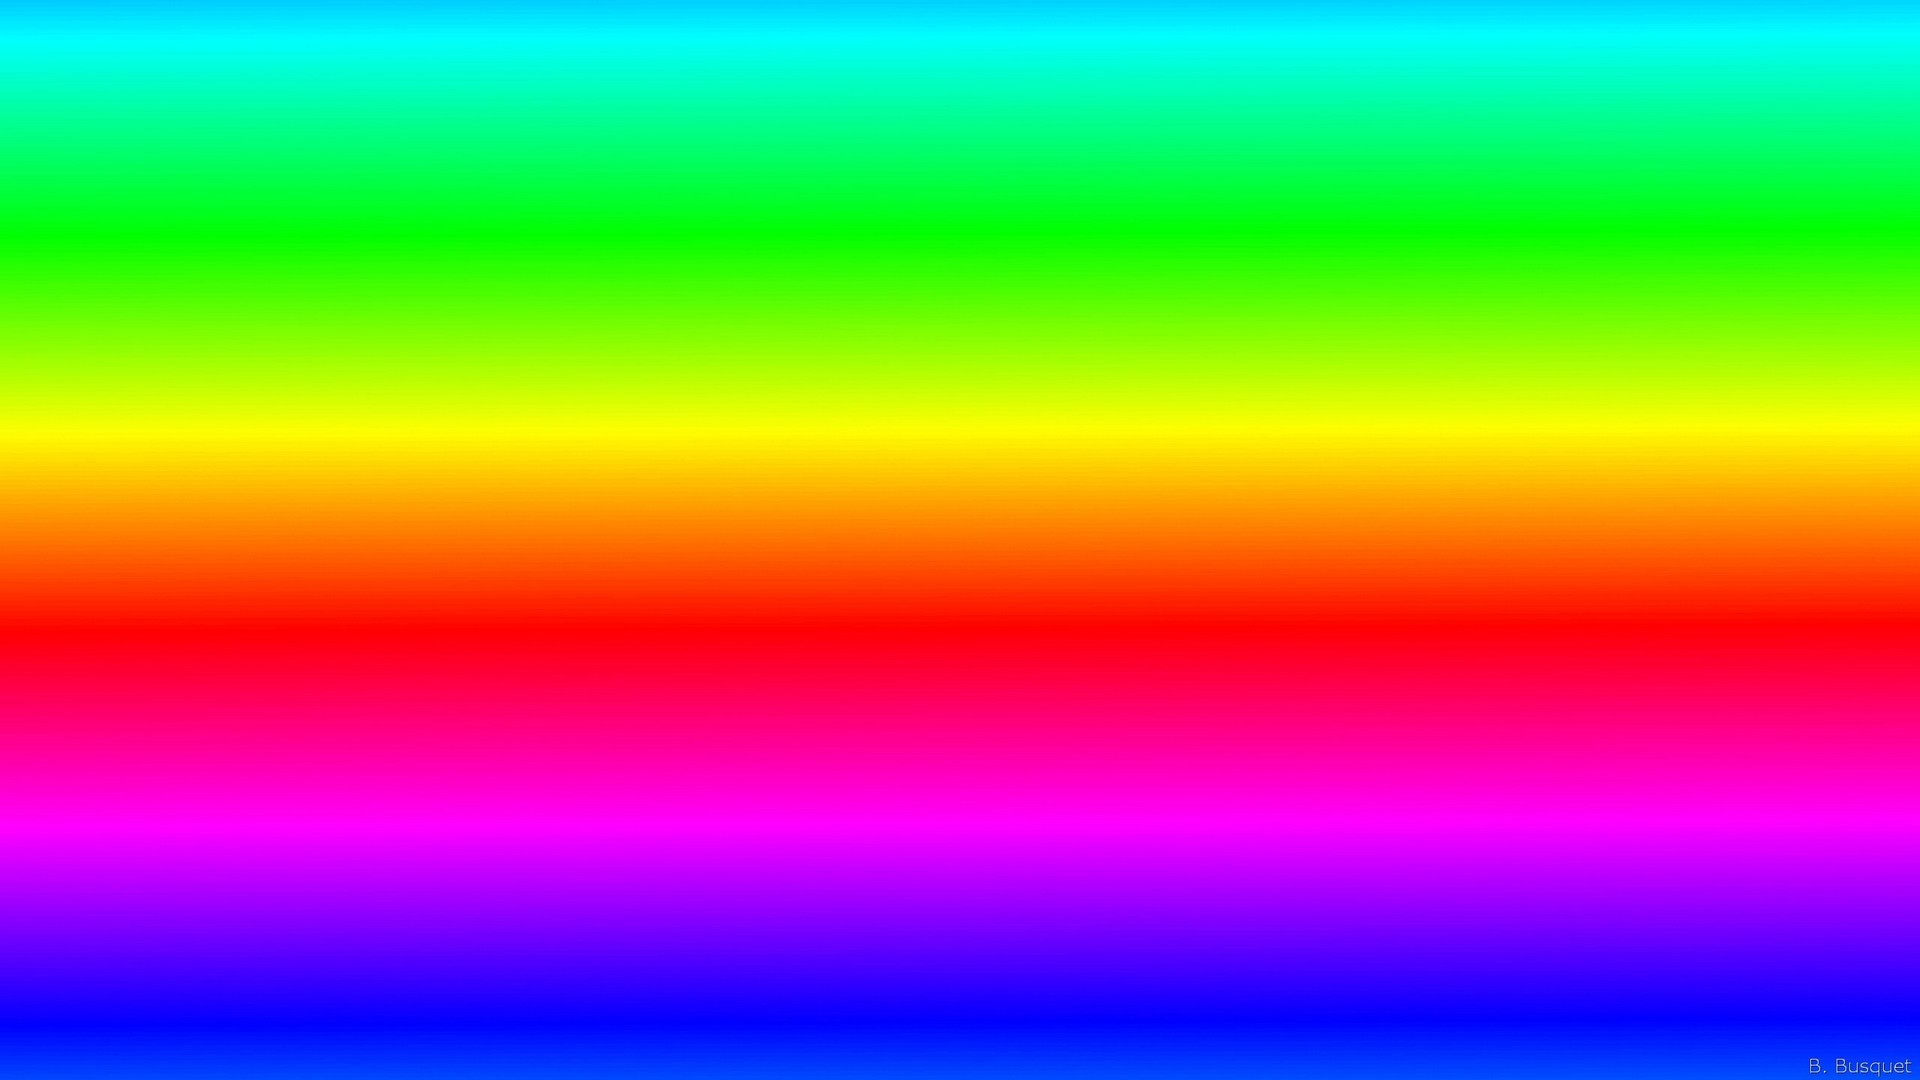 Wallpapers Computer Rainbow with image resolution 1920x1080 pixel. You can make this wallpaper for your Desktop Computer Backgrounds, Mac Wallpapers, Android Lock screen or iPhone Screensavers